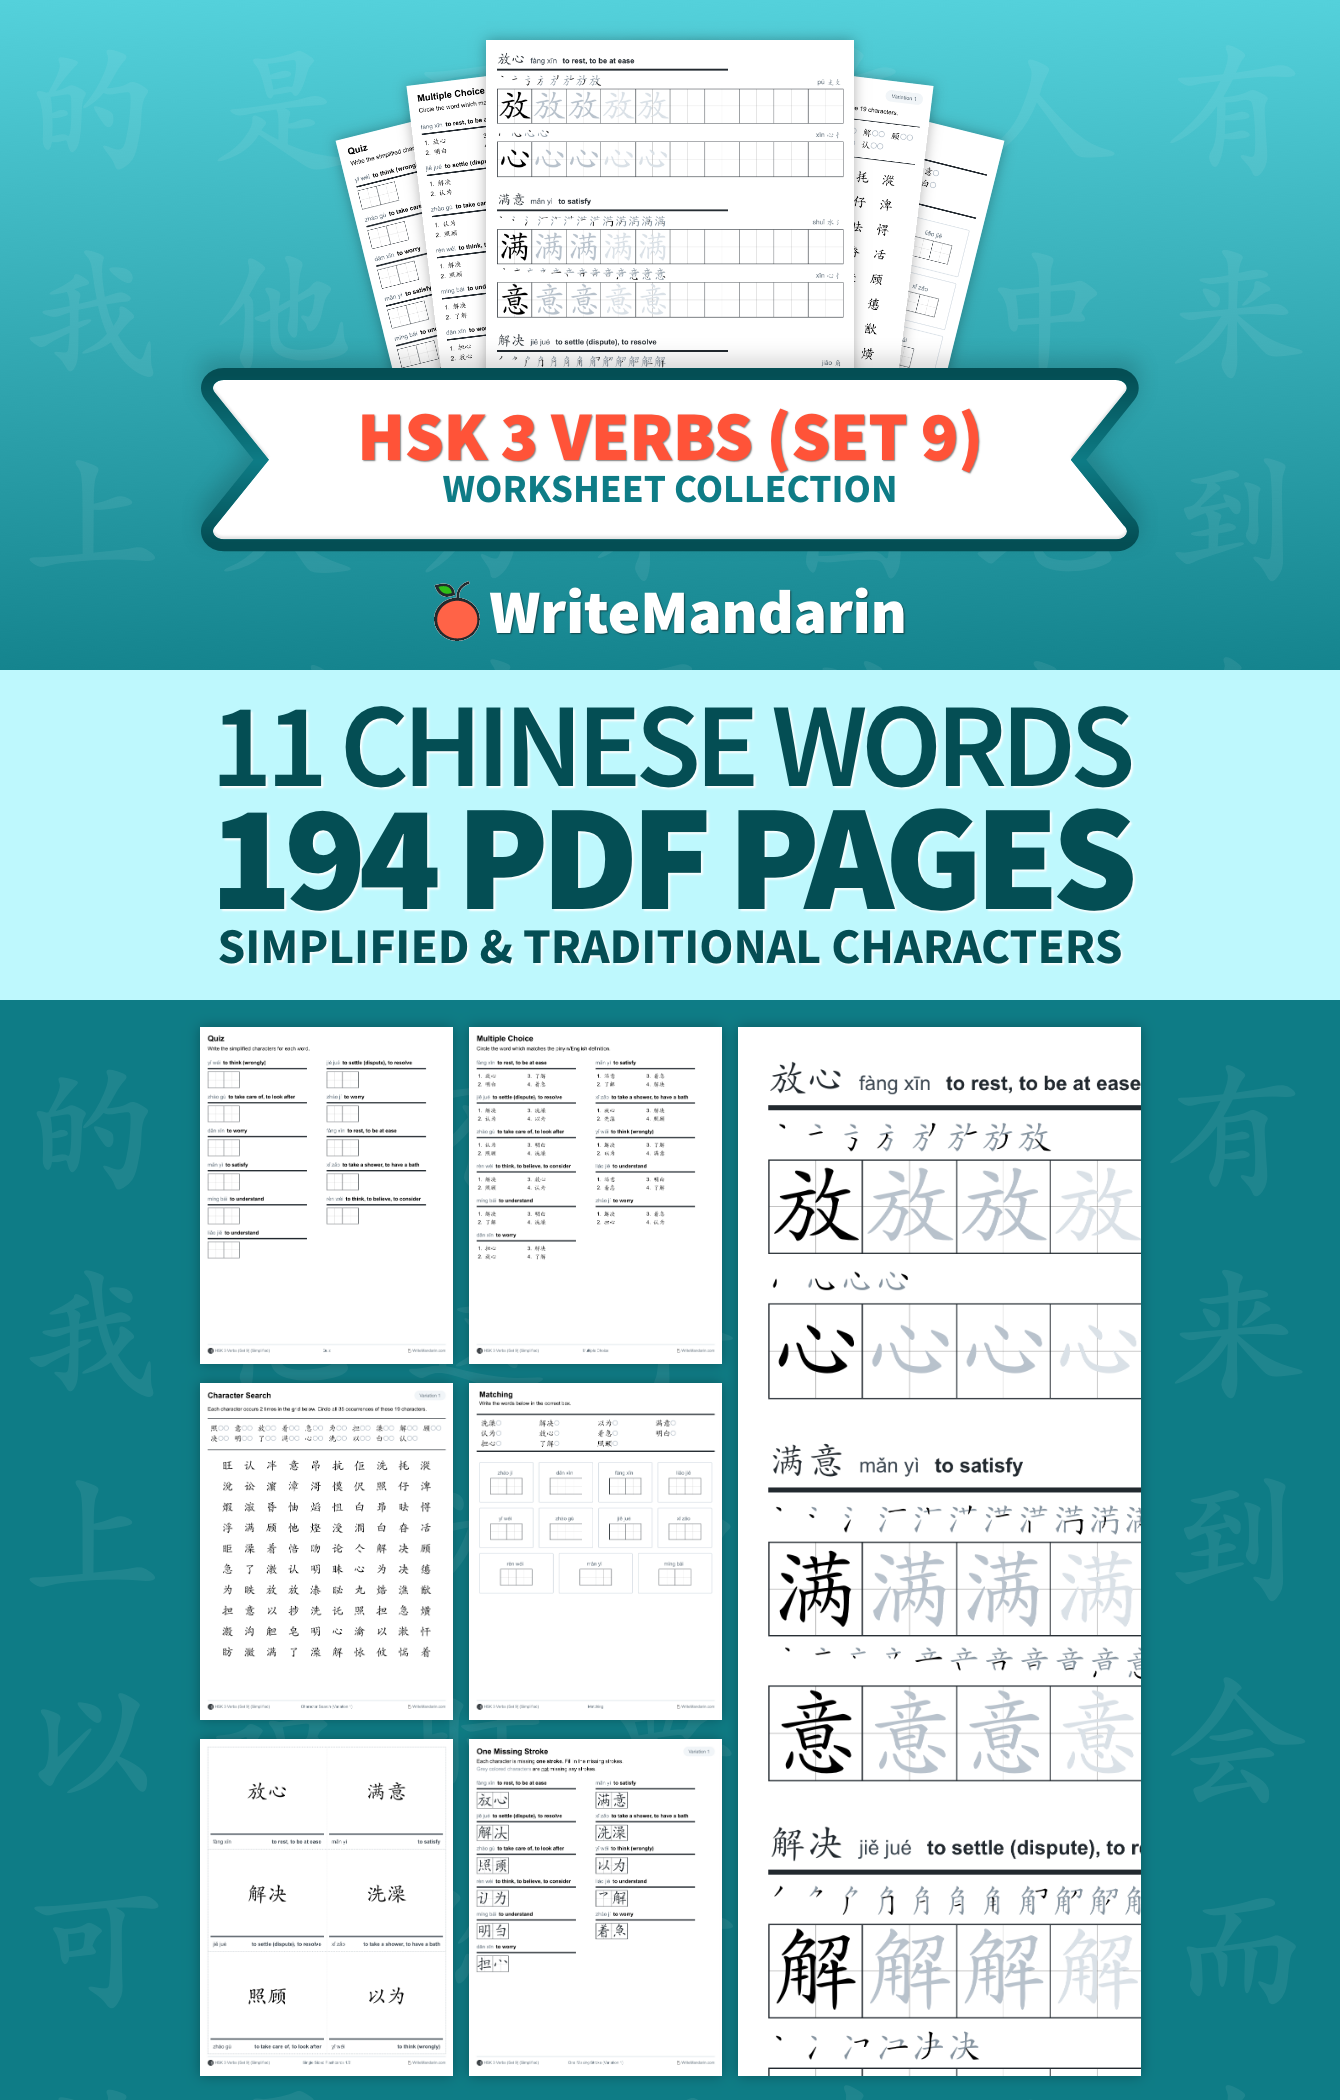 Preview image of HSK 3 Verbs (Set 9) worksheet collection